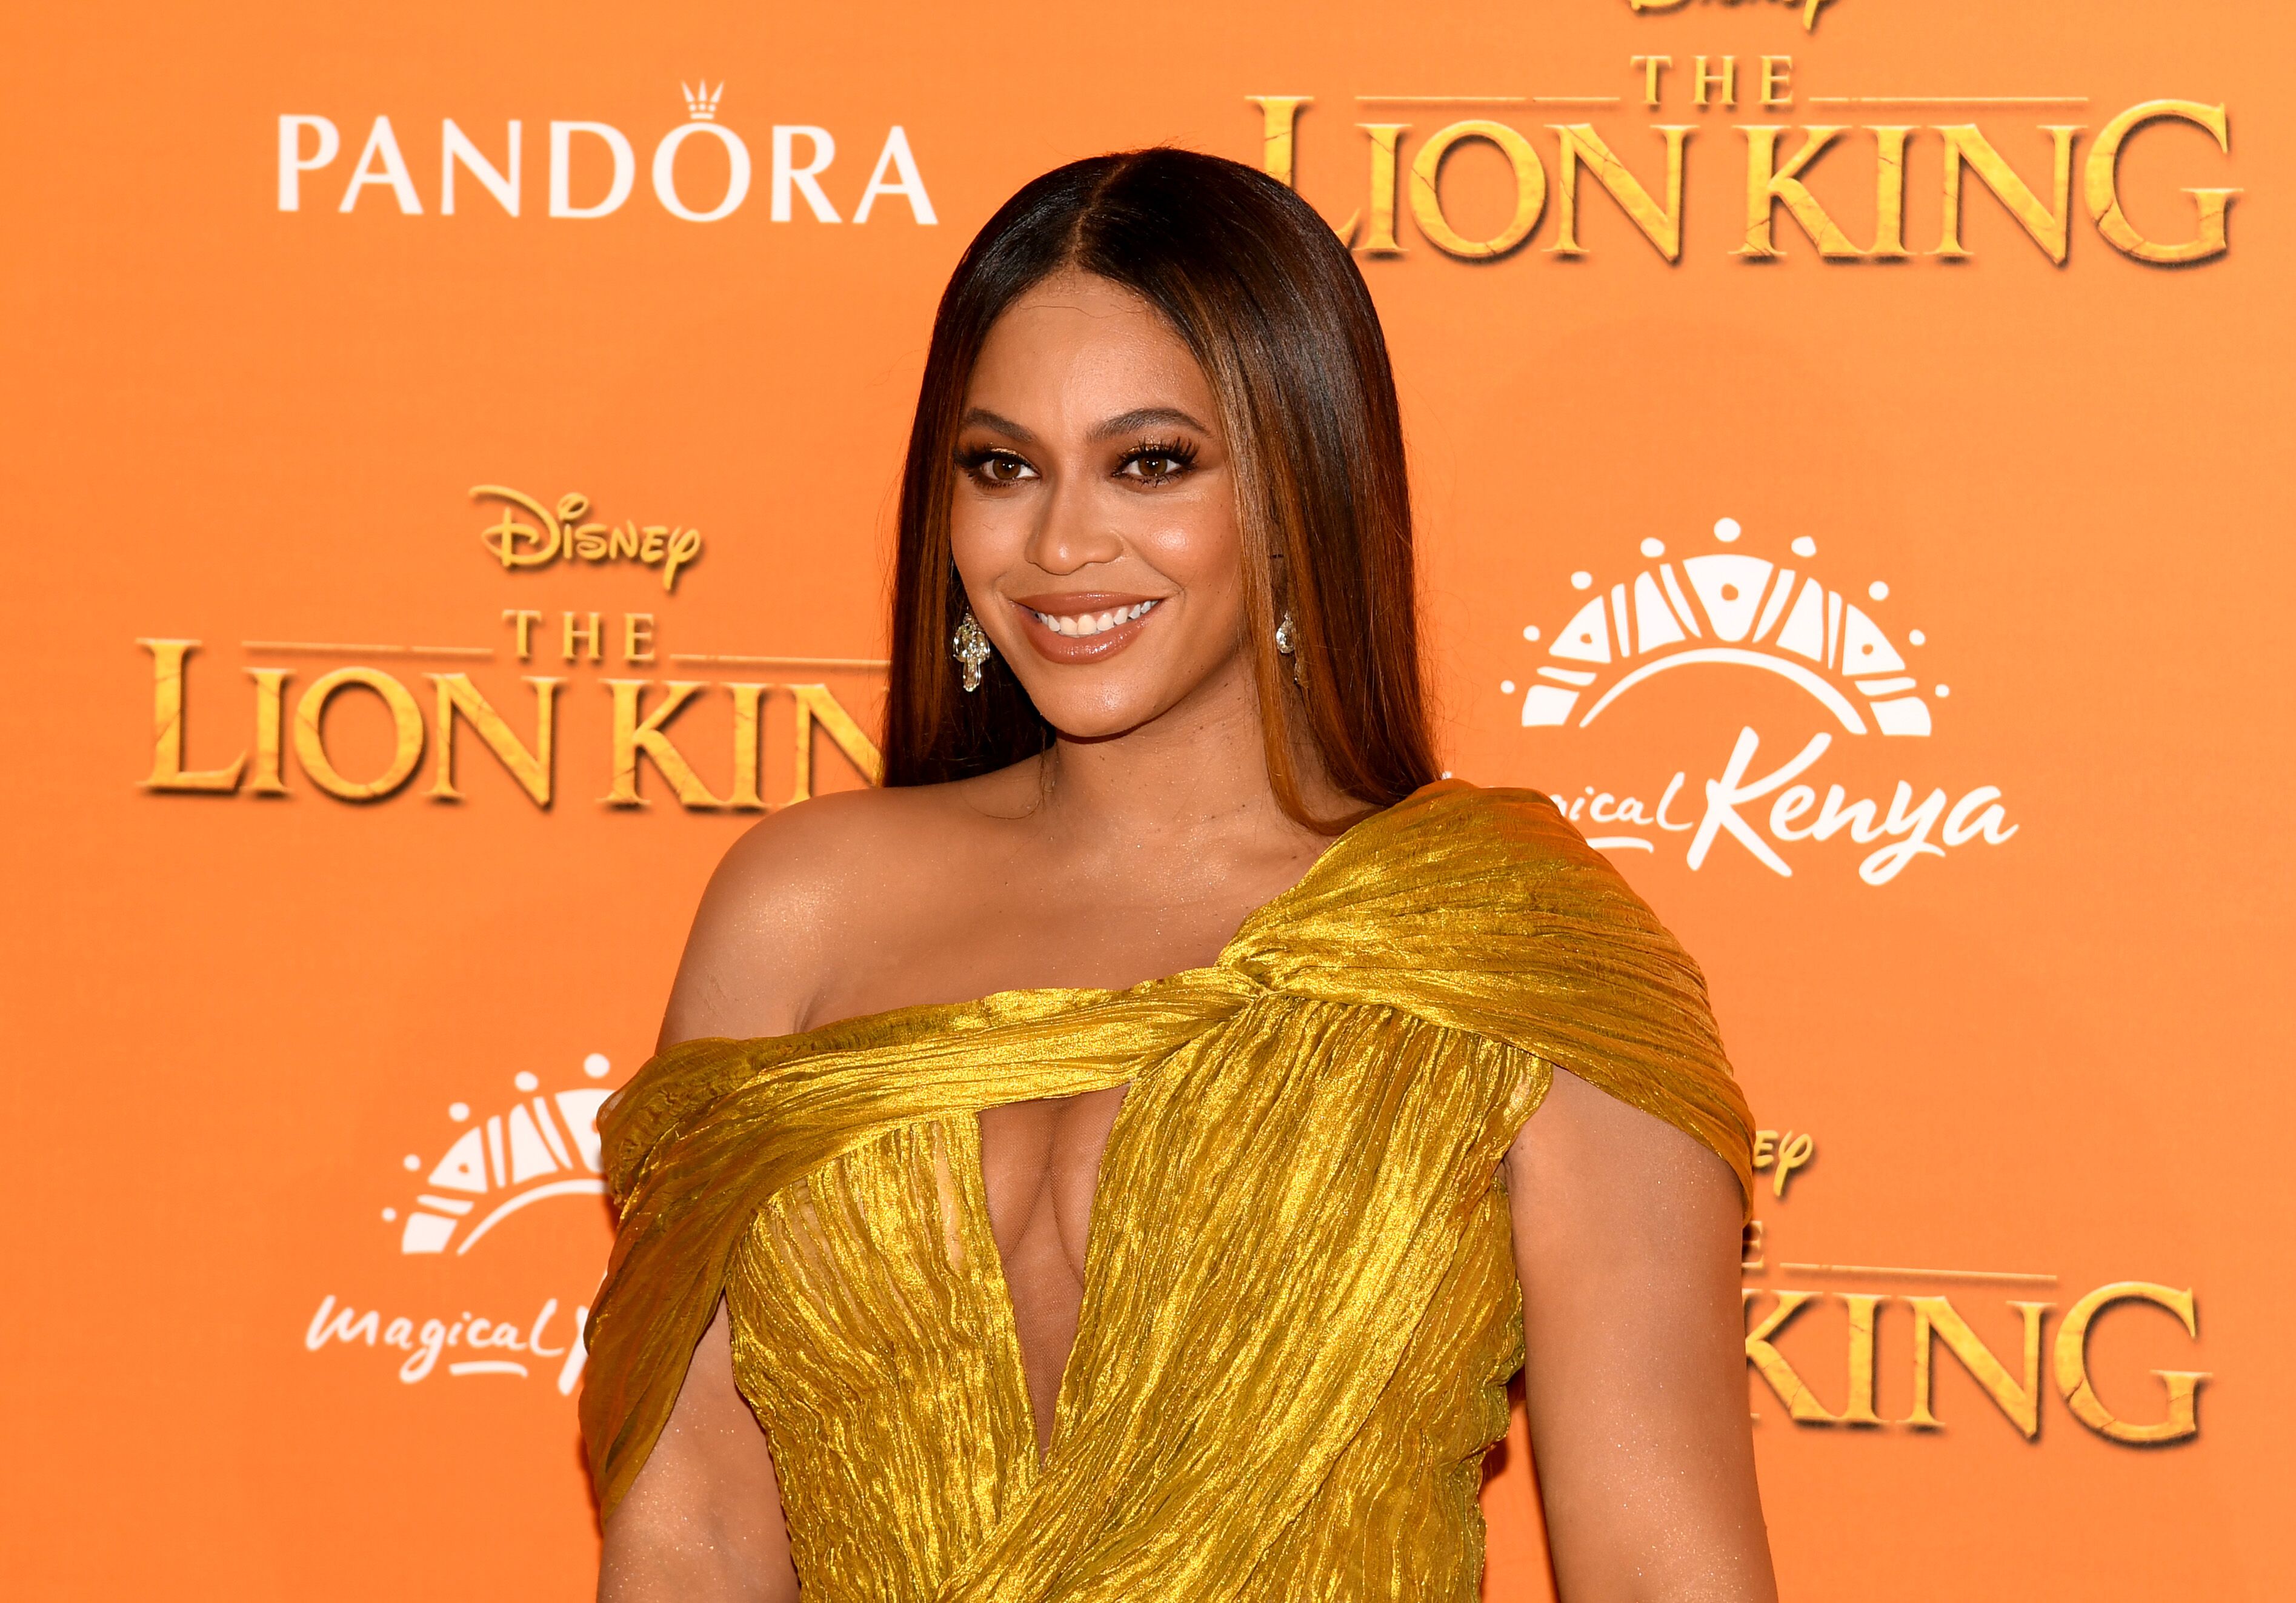 Beyonce at the "Lion King" movie premiere | Source: Getty Images/GlobalImagesUkraine